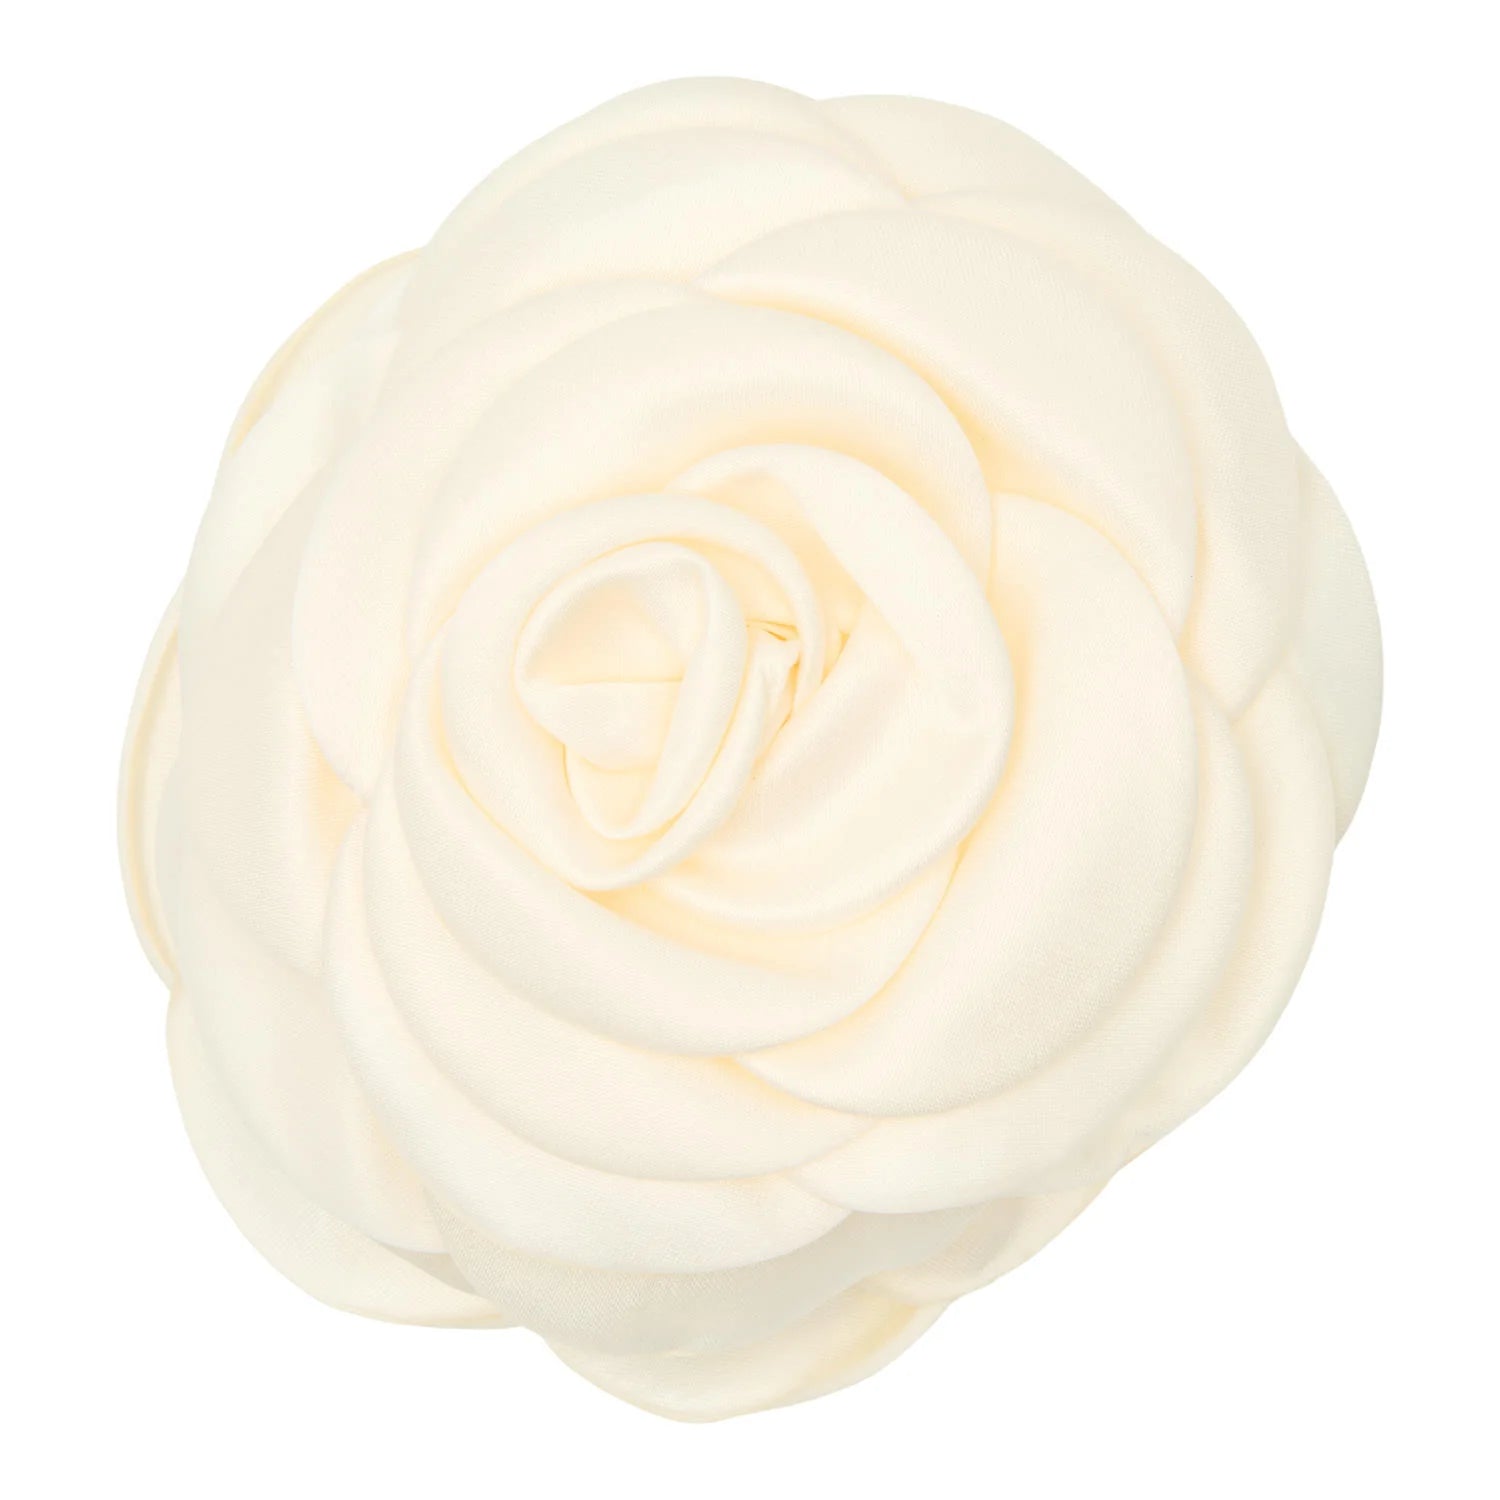 Giant Satin Rose Claw Ivory